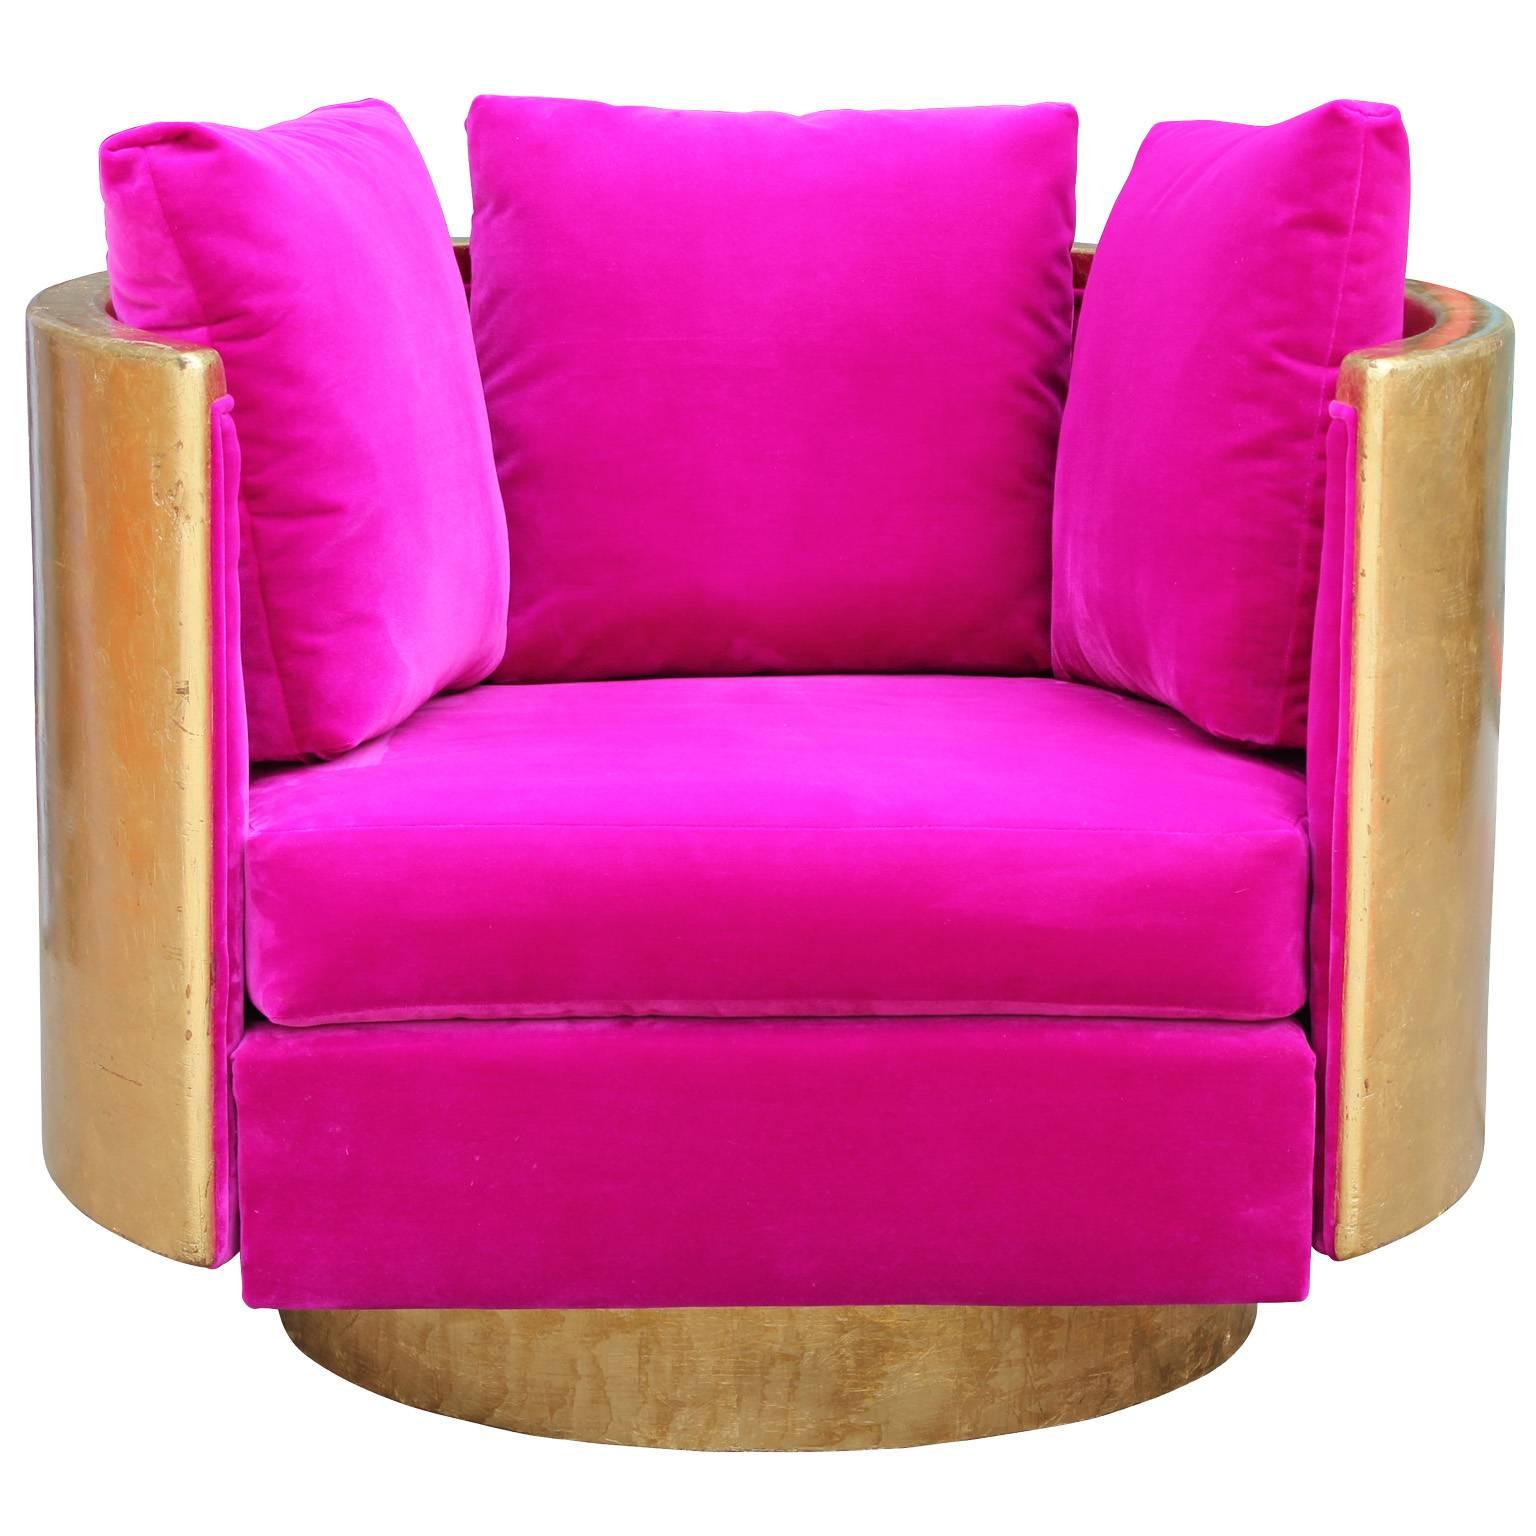 Luxe round barrel back swivel chair freshly upholstered in plush fuchsia pink velvet. Wood case frame is gold leafed. Lounge chair is sure to make a statement in any space. Superb quality.